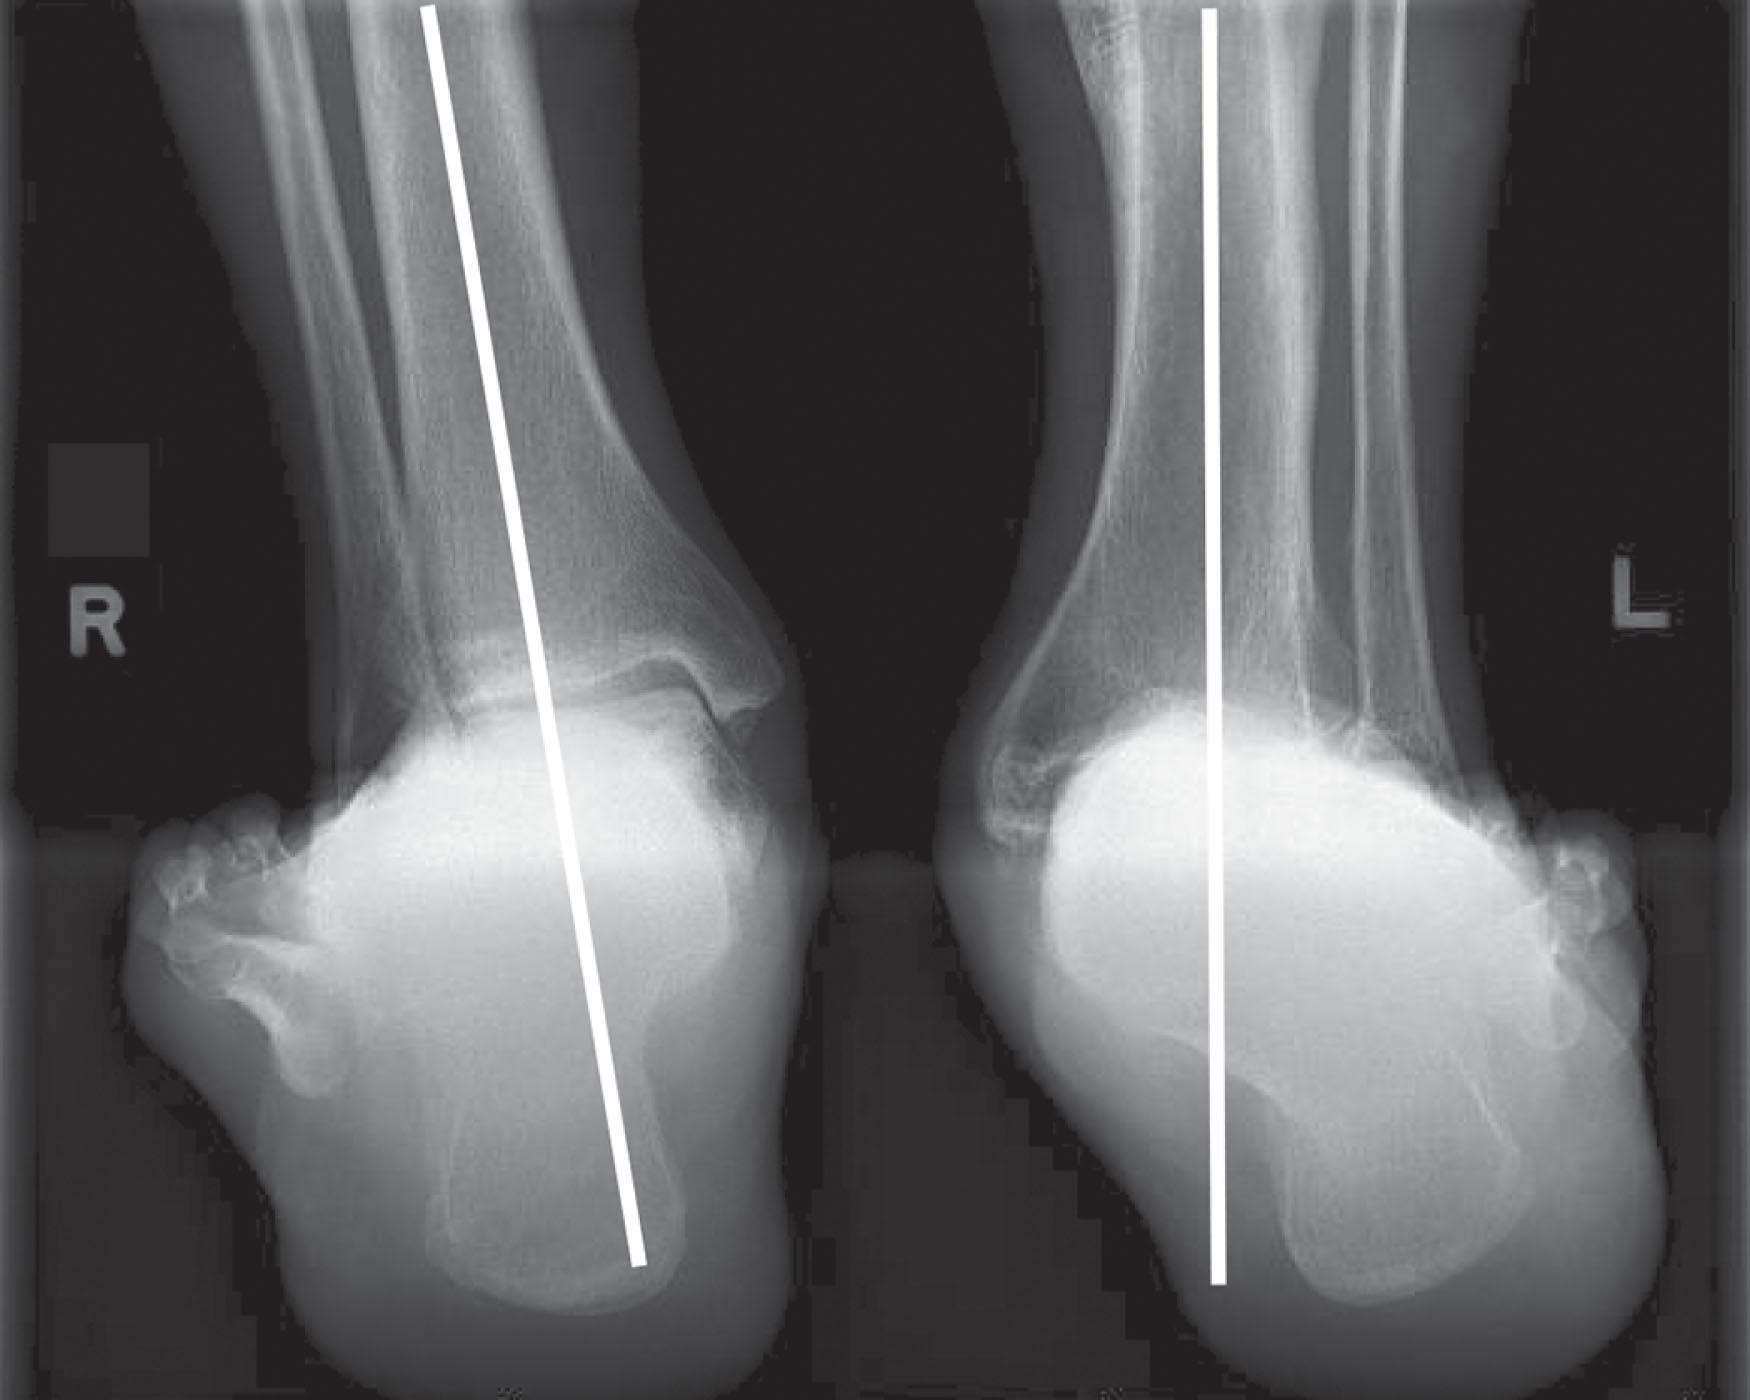 Fig. 22-5, The hindfoot alignment view is taken with the patient standing on a platform, with the toes pointed straight ahead at the film plate. The x-ray beam is directed toward the ankle in a posterior to anterior direction, tilted 20 degrees caudad. The film is placed near the toes, also tilted 20 degrees, oriented exactly perpendicular to the beam. 250 A line passing down the central longitudinal axis of the tibia should bisect the medial 1/3–lateral 2/3 of the calcaneus as seen on the radiograph of the right ankle (R). The left ankle and hindfoot (L) is in considerable valgus.